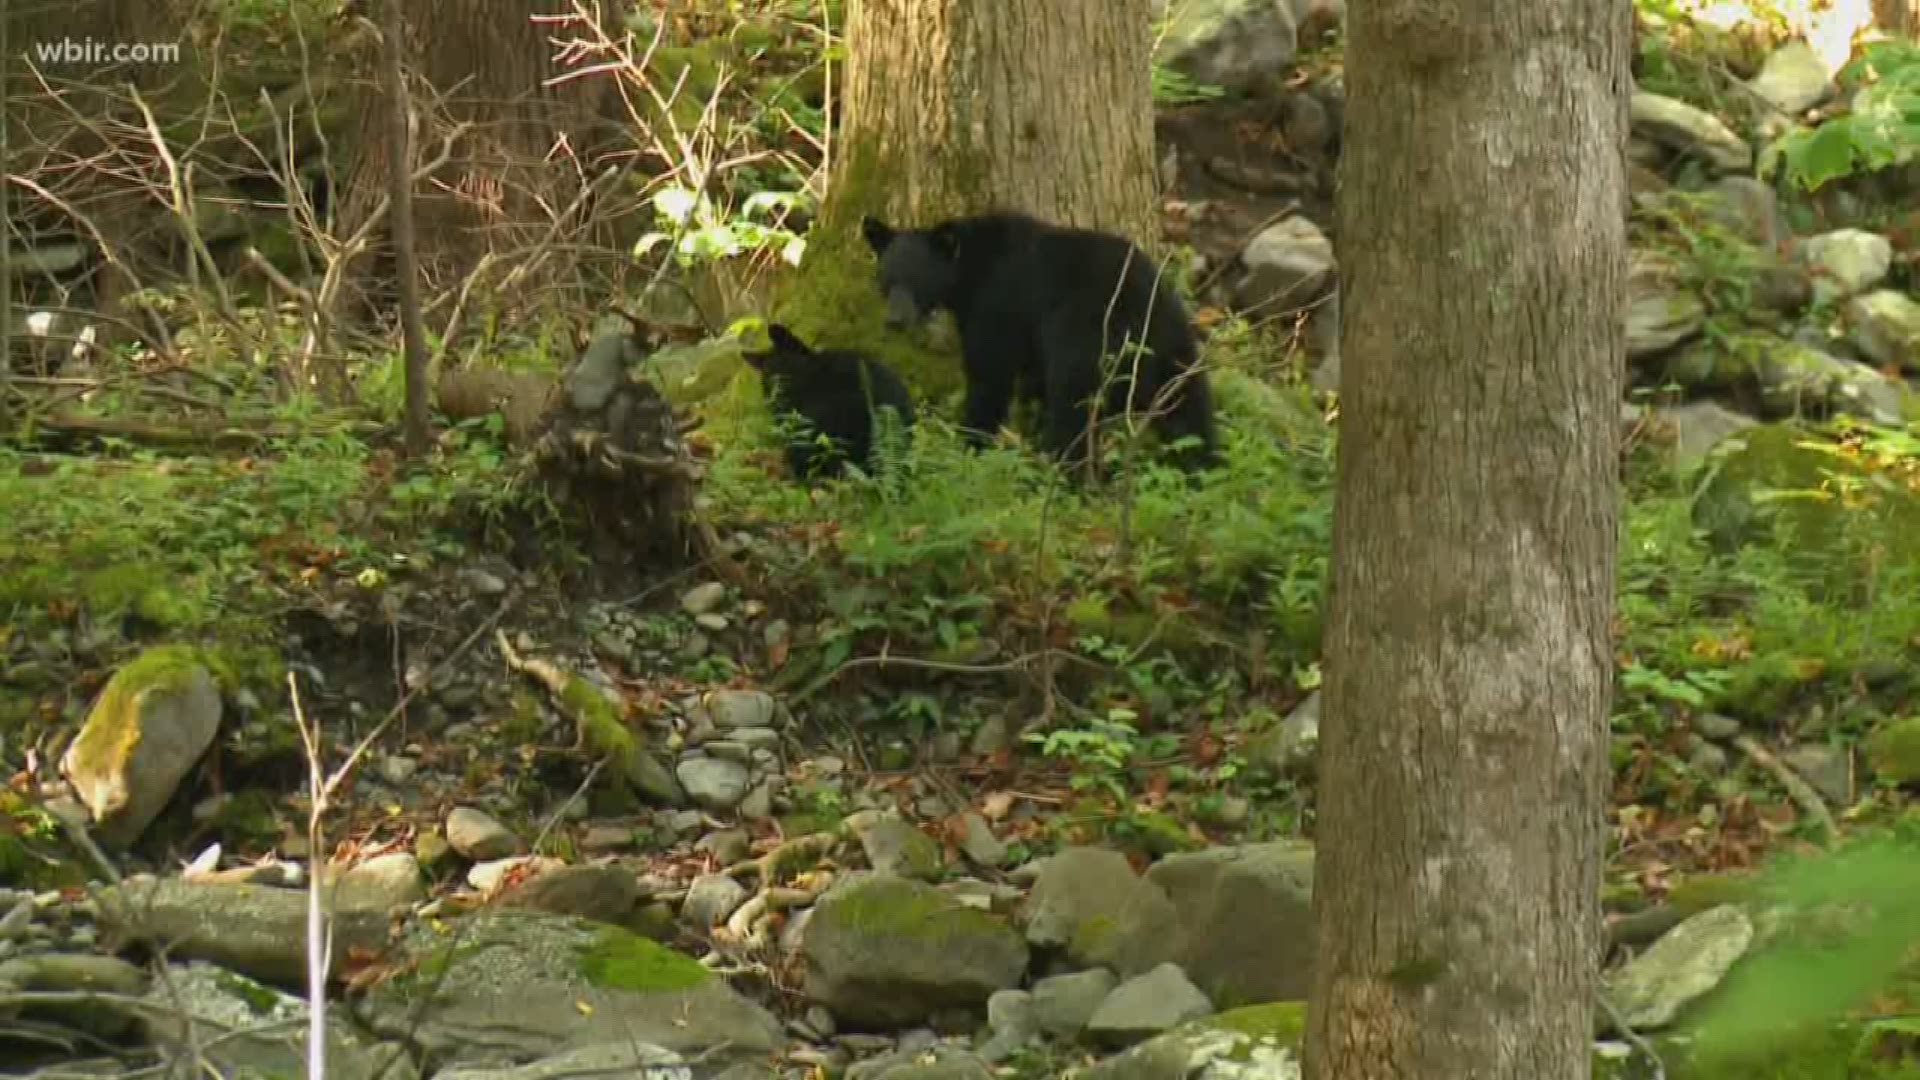 Almost all of East Tennessee is dealing with 'abnormally dry' and 'severe drought' conditions. But   for bears -- that's helping them with an important food source.